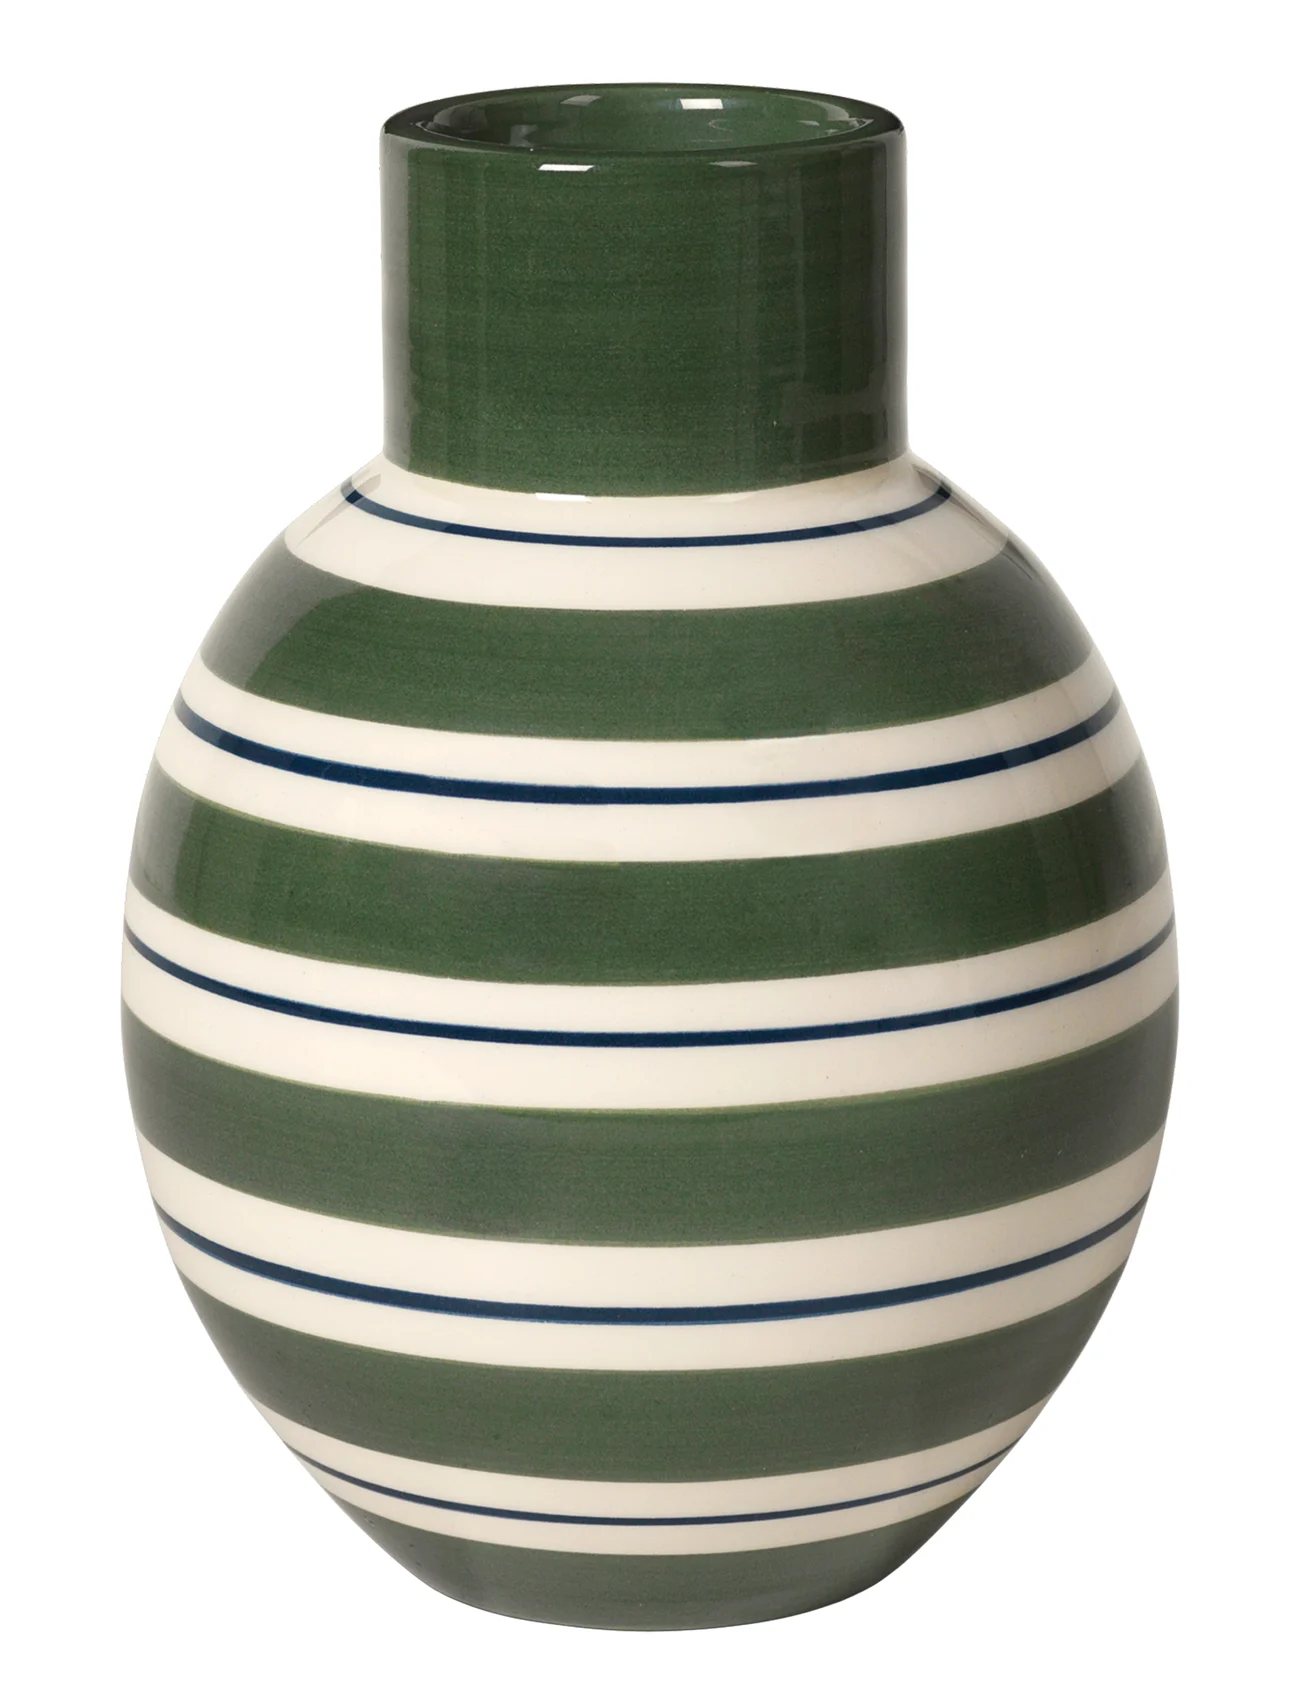 Kähler - Omaggio Nuovo Vase H14.5 green - lowest prices - green - 0